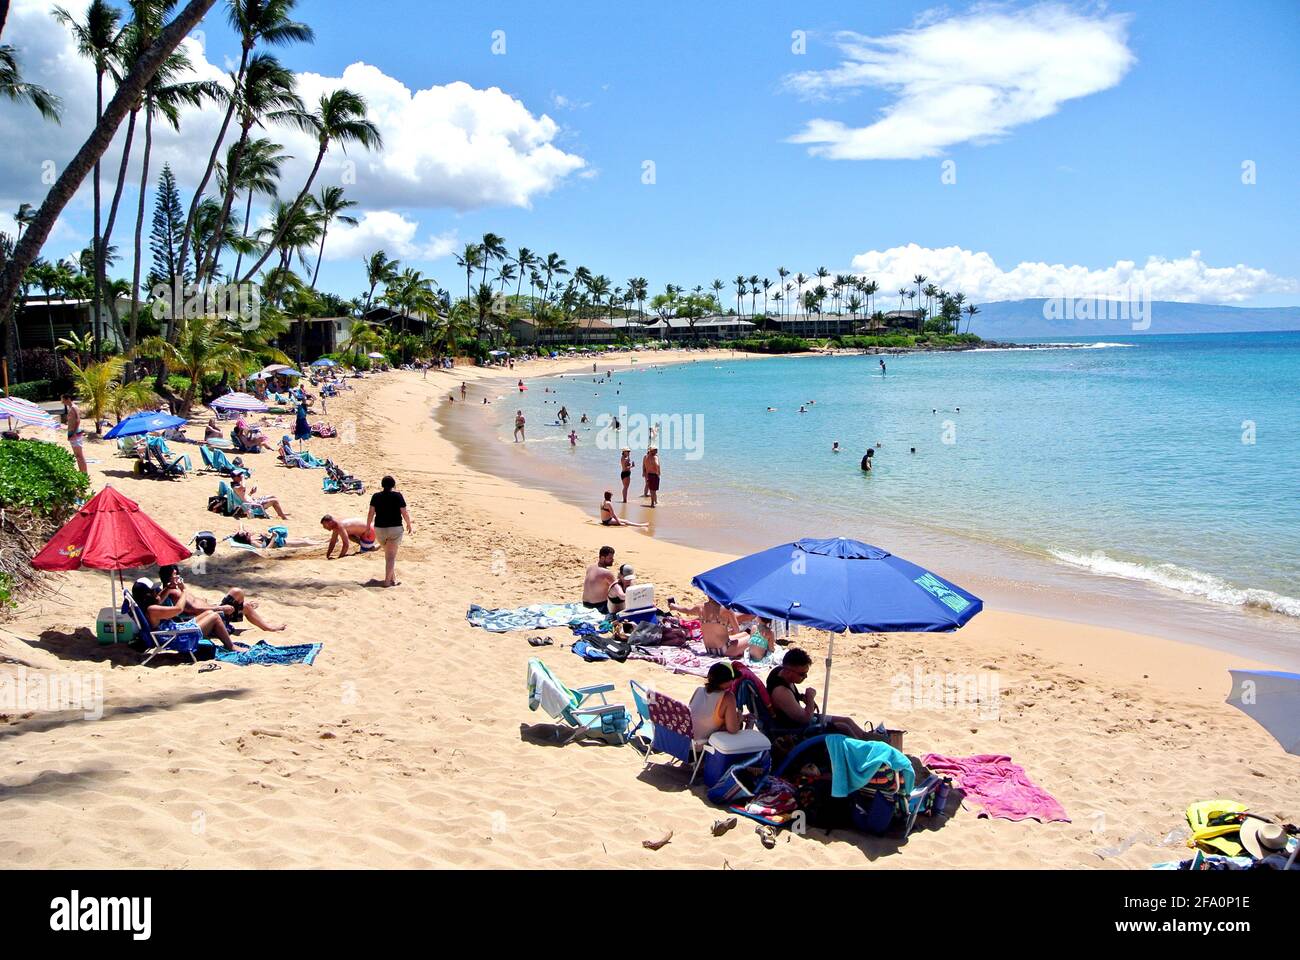 tourists relax under umbrellas and swim and play on the sandy sunny kaanapali beach west of the town of Lahaina on the island of Maui Hawaii usa Stock Photo